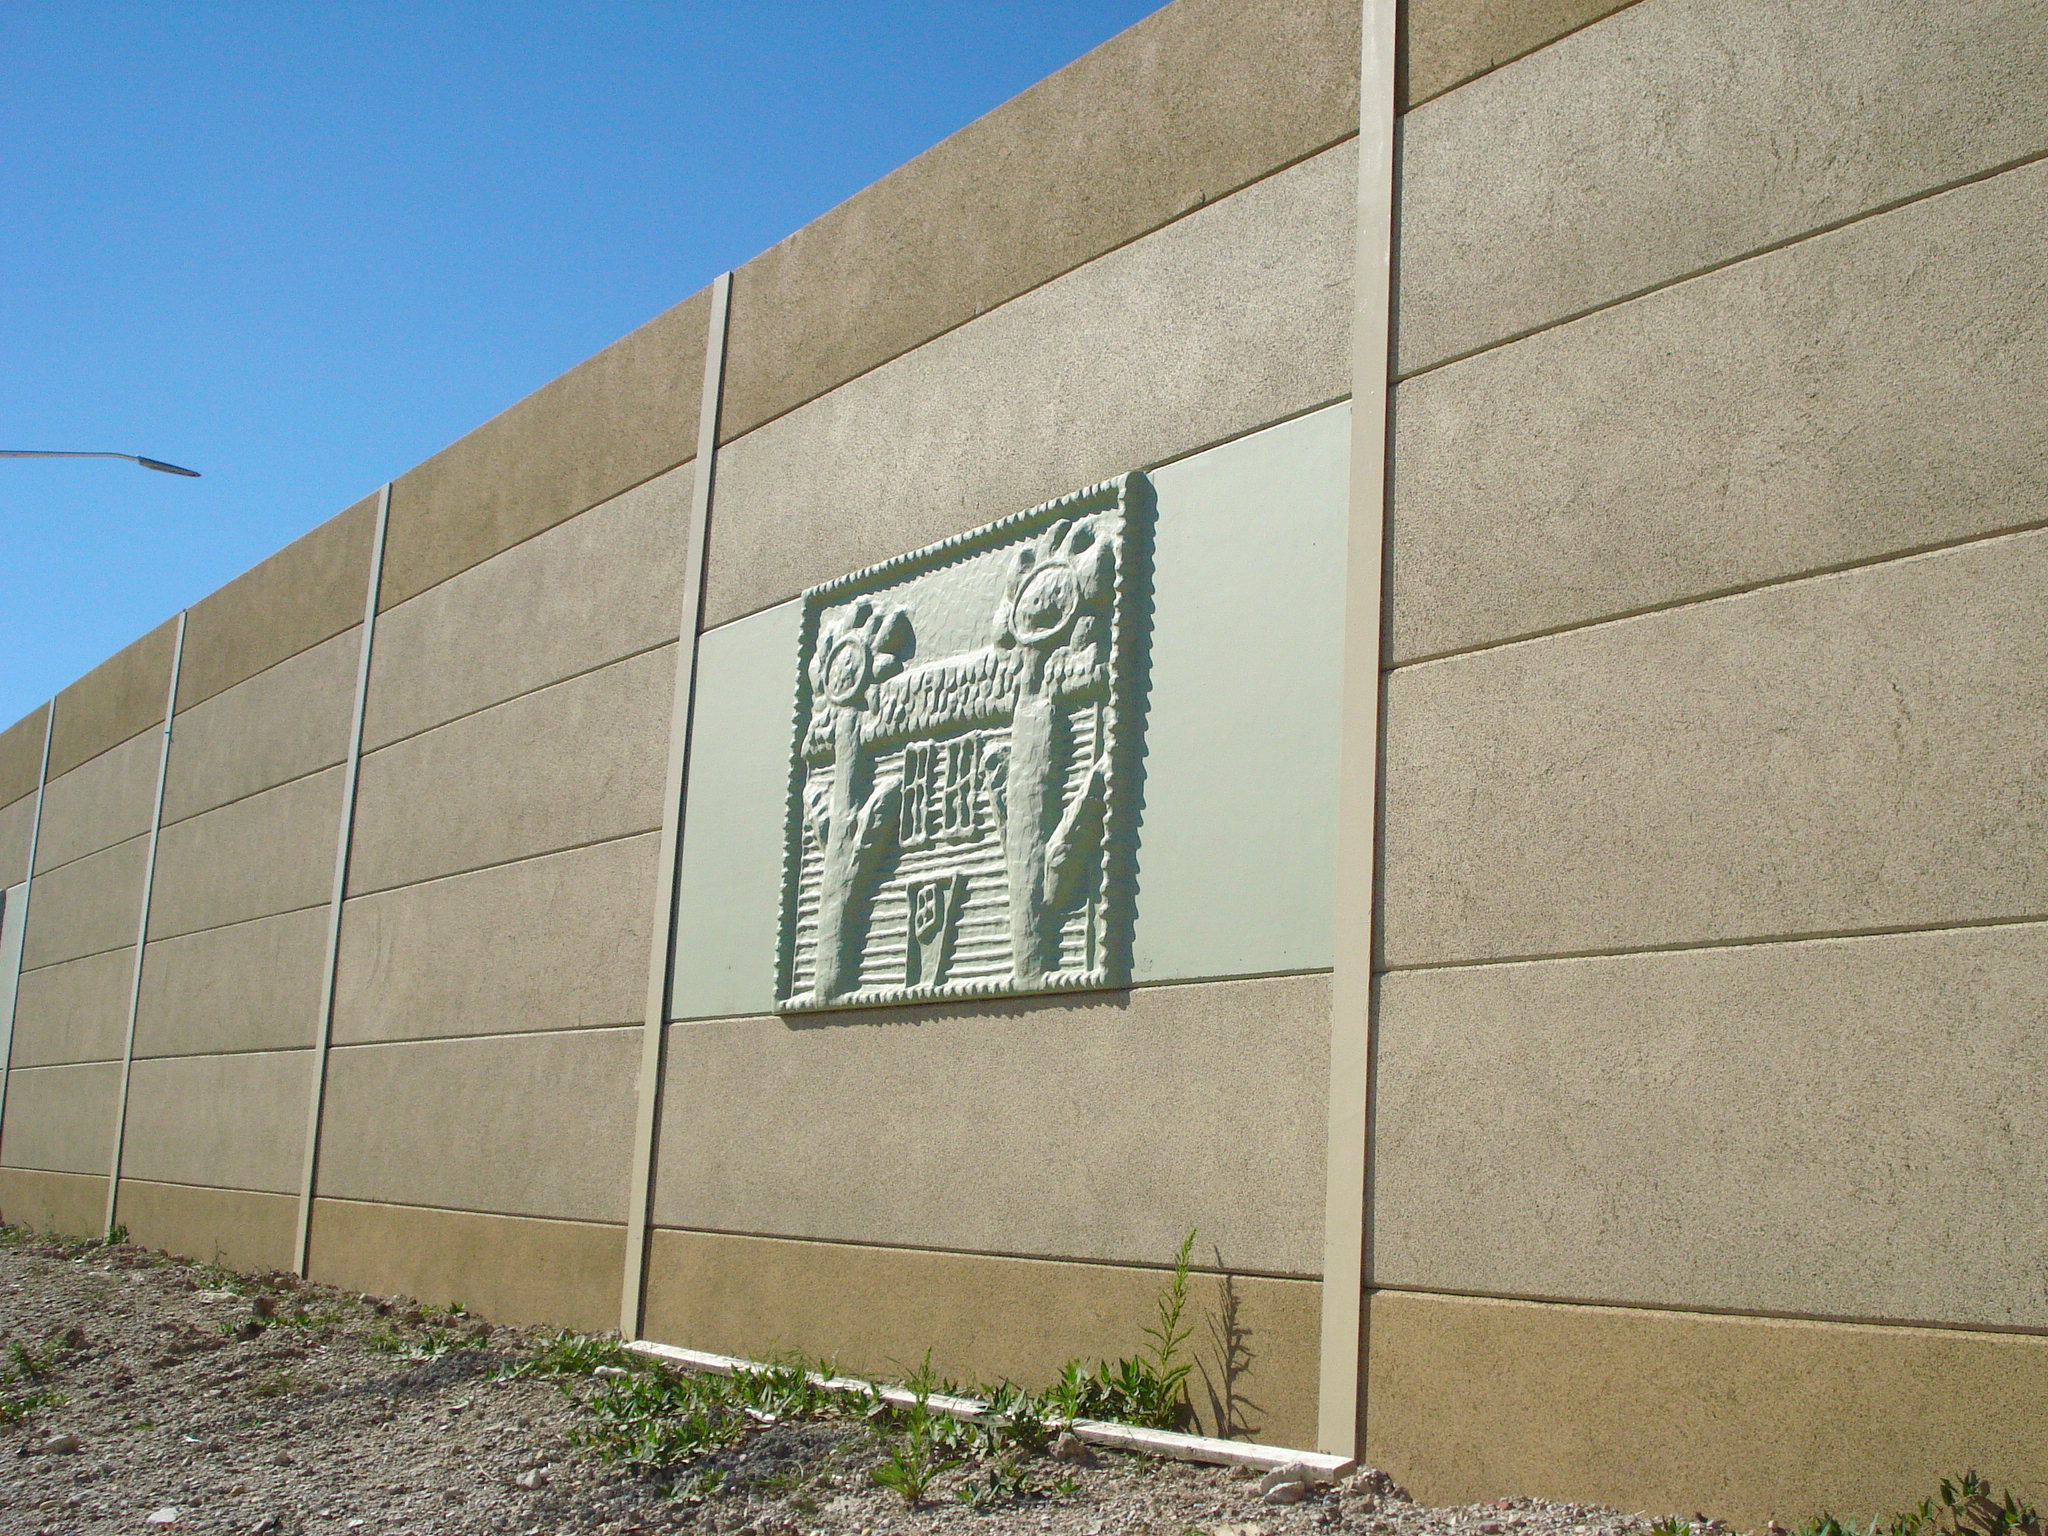 A precast noise barrier featuring custom panels created from children's drawings along I-94 in Milwaukee, WI.